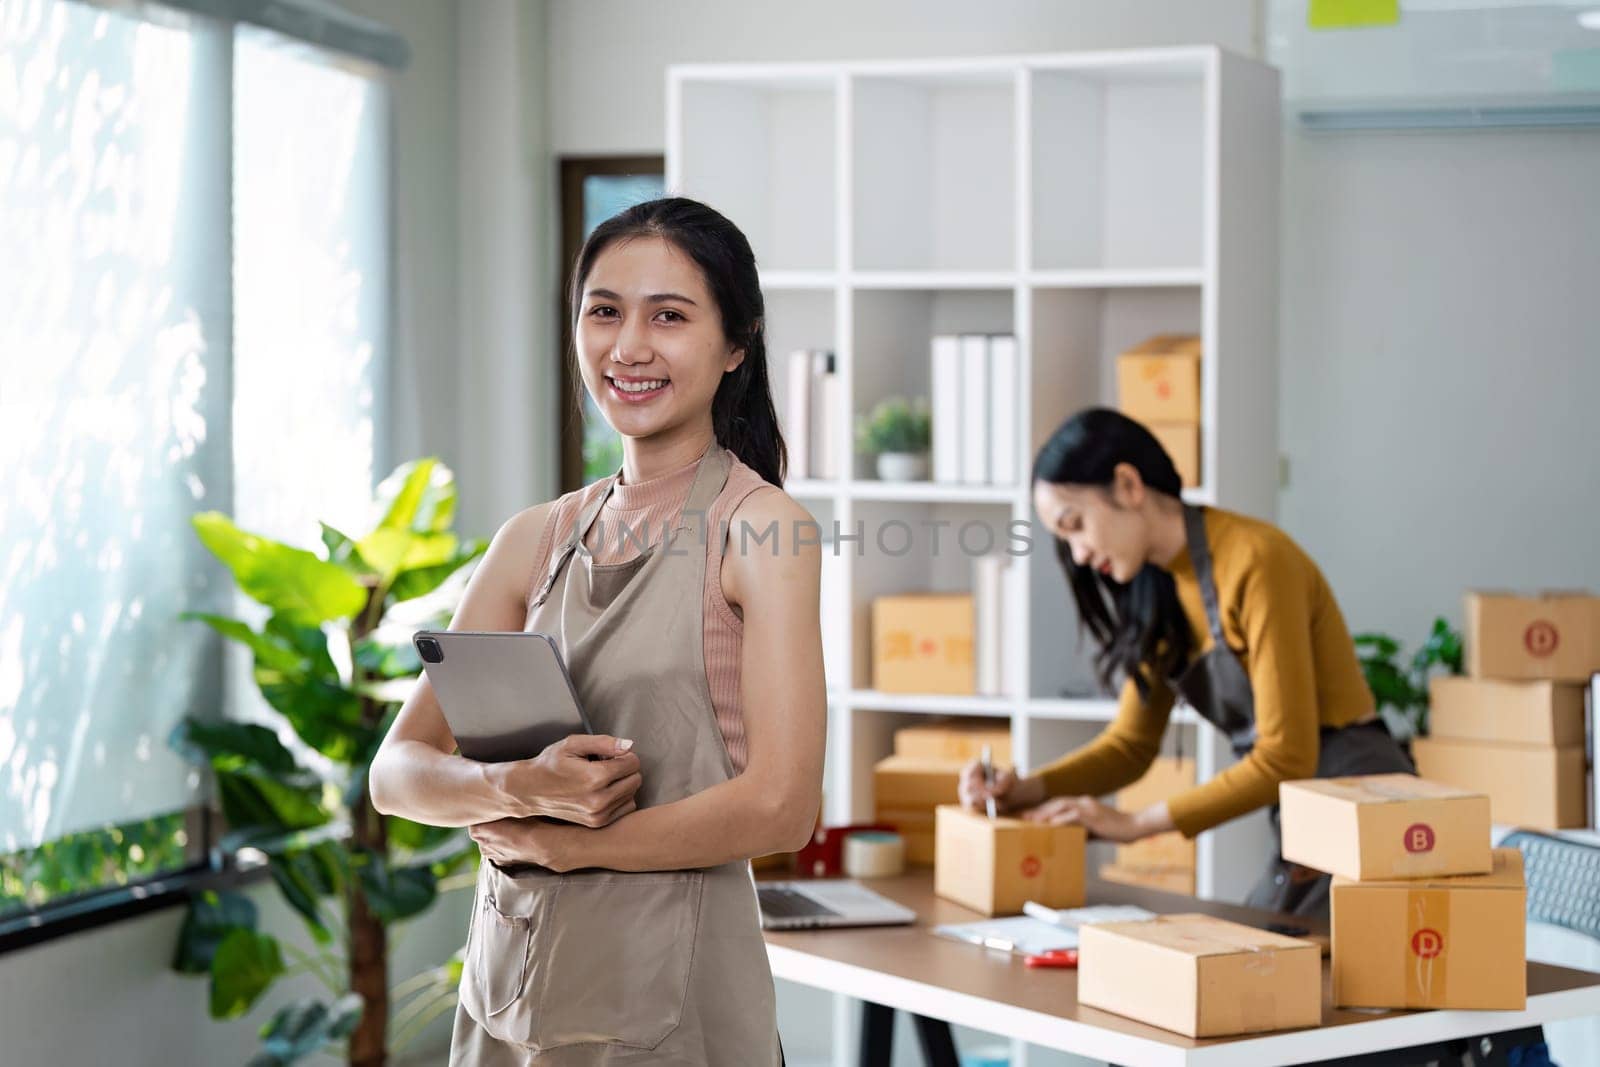 Entrepreneur startup business woman sme holding tablet. Small Online Business Owner, Online Marketing and Product Packing and Delivery Service. E-commerce concept.